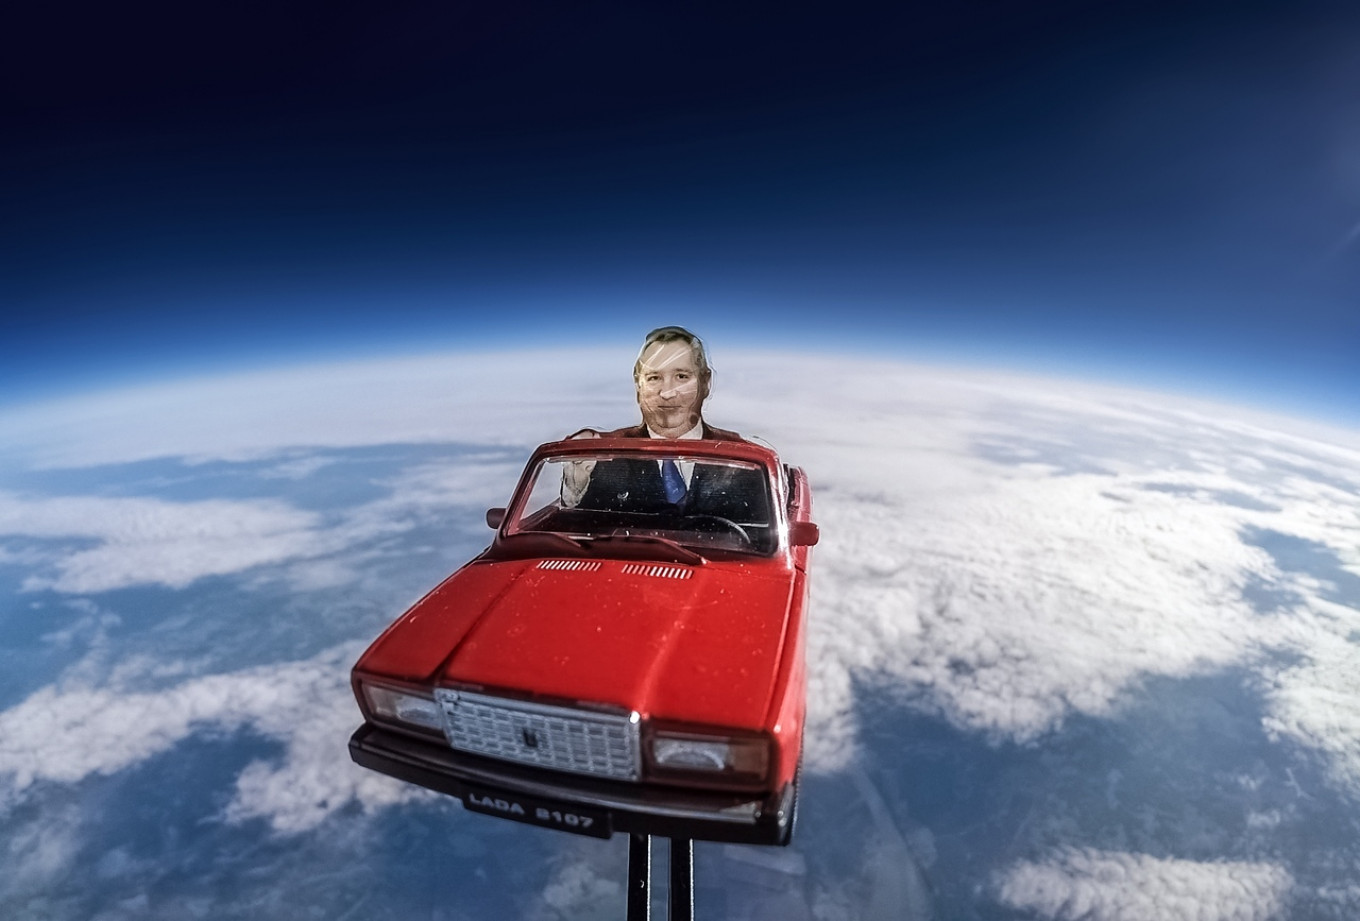 Russian Scientists Send Effigy Into Space in Toy Car, Mimicking SpaceX Launch - The ...1360 x 921